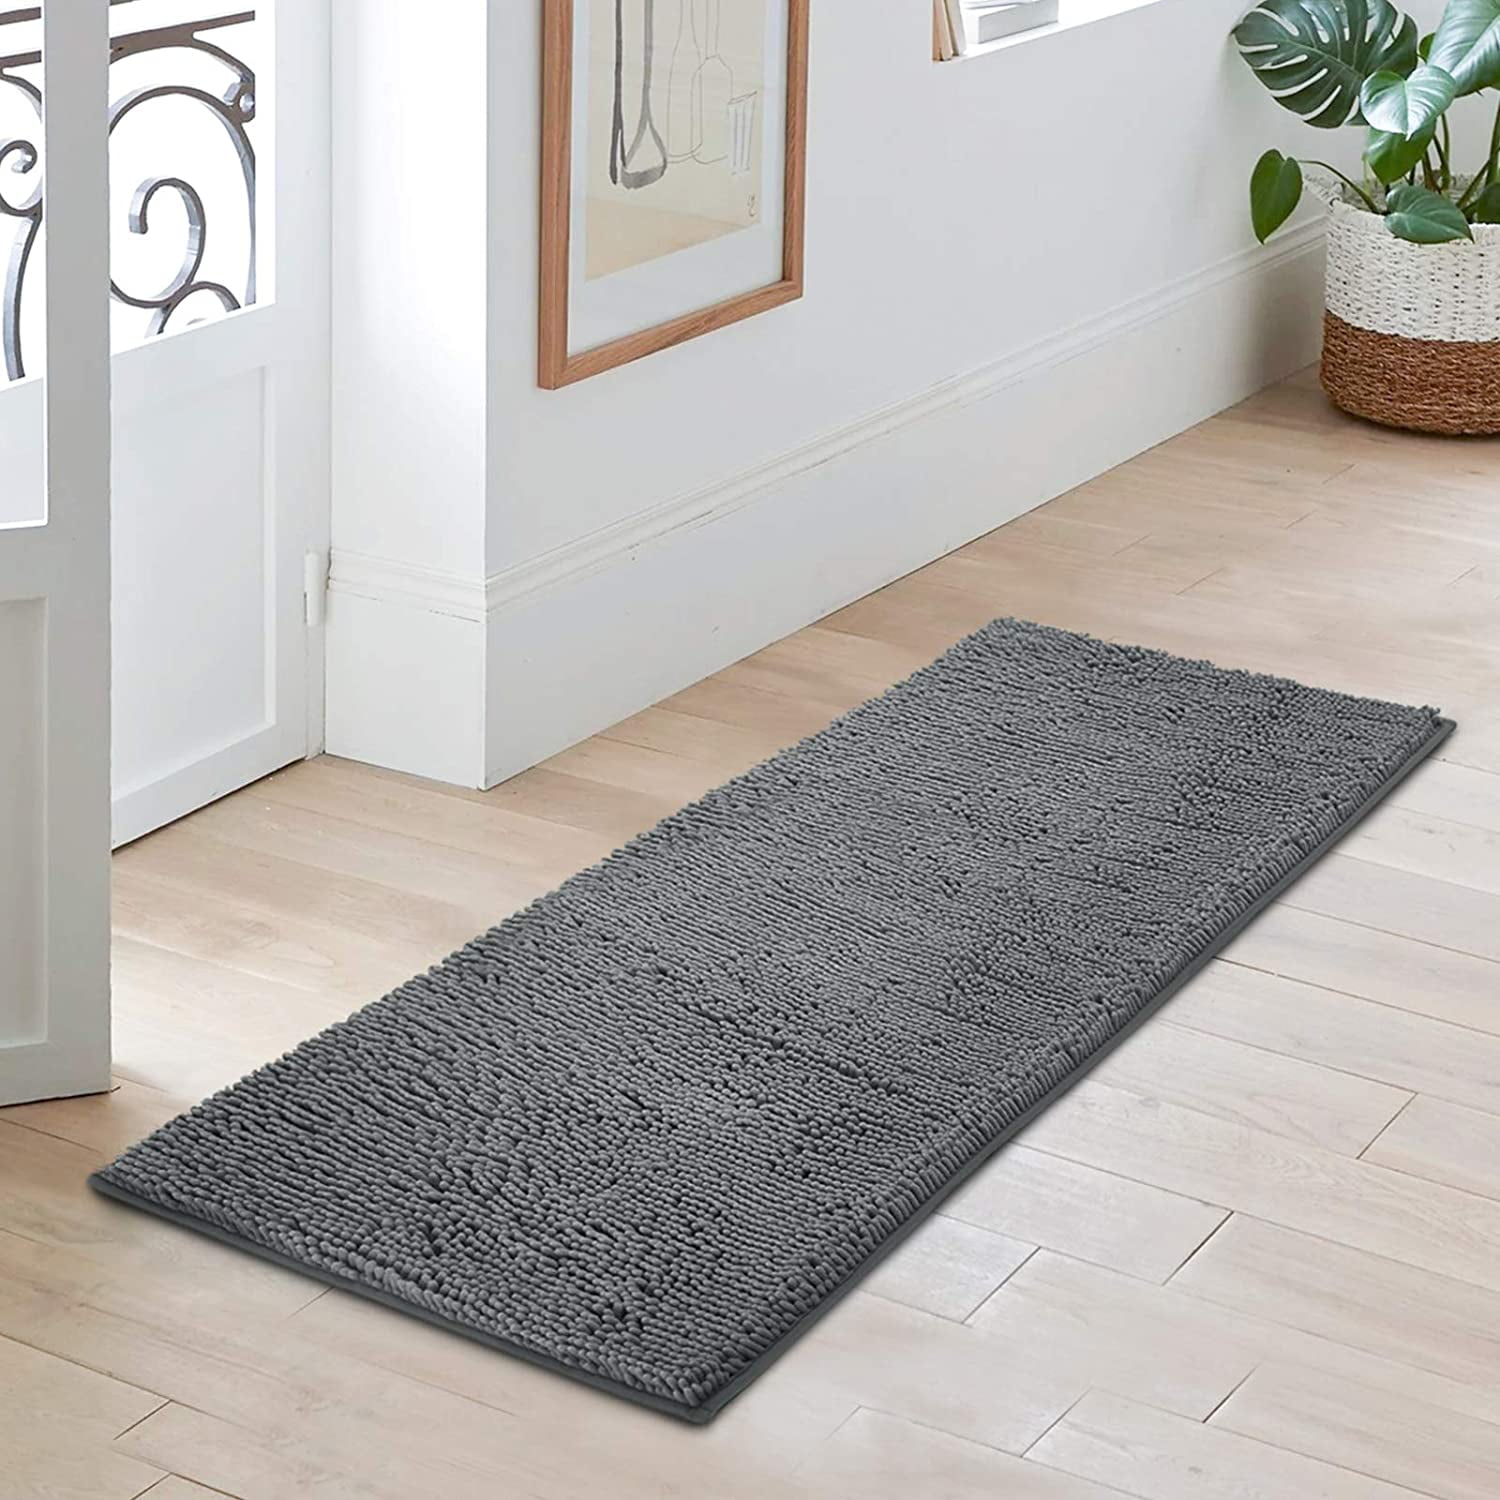 Long Hall Hallway Runners Soft Washable Soft Textured Warm Entrance Mats 